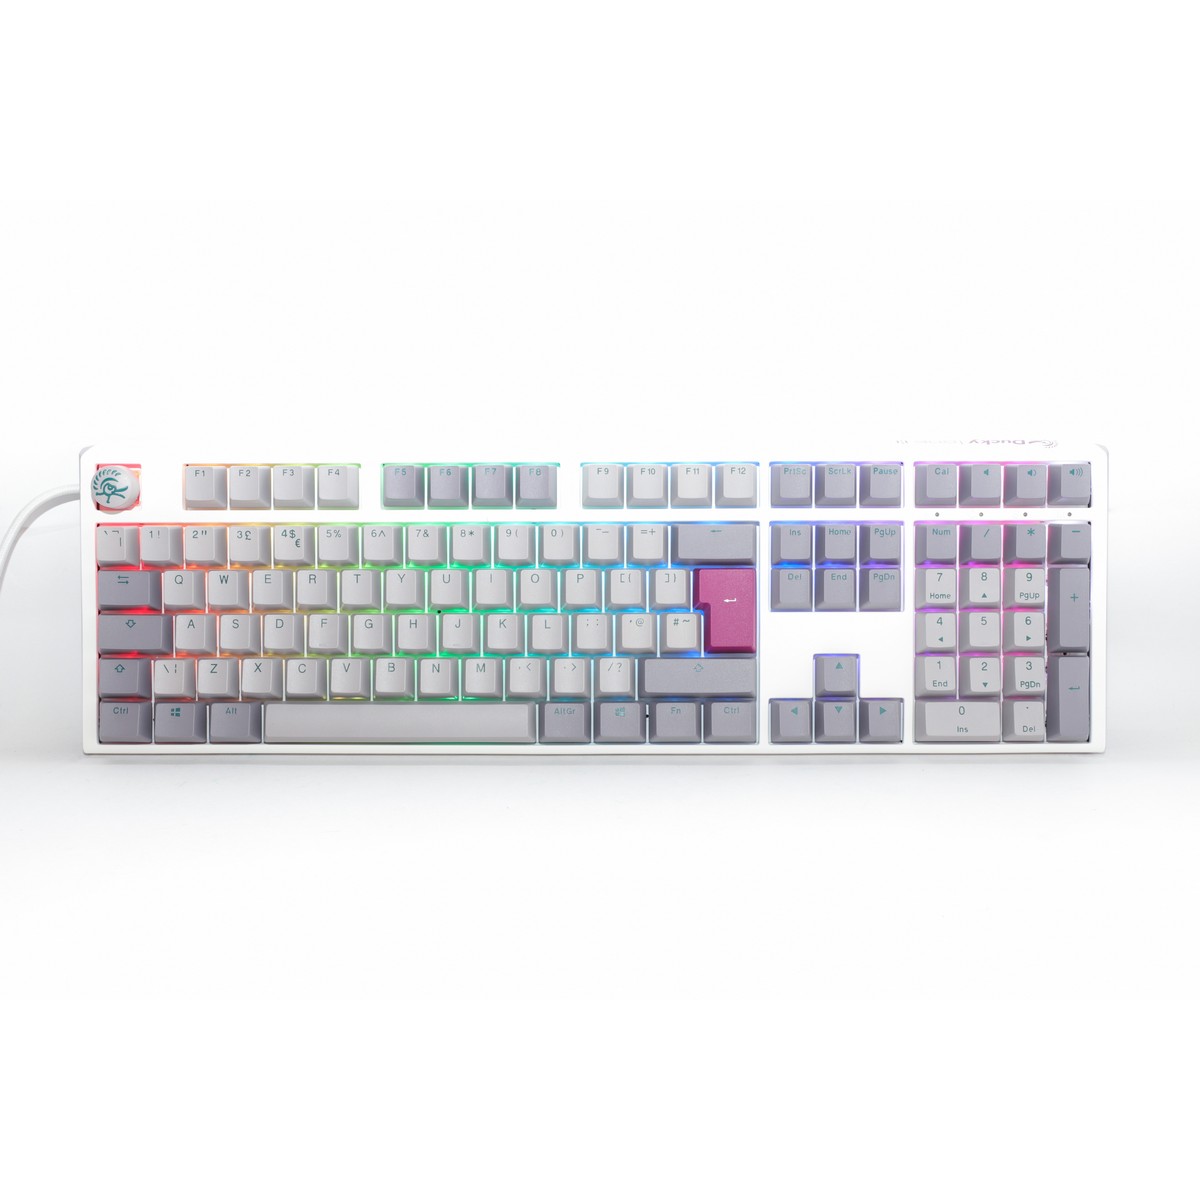 Ducky One 3 Mist USB RGB Mechanical Gaming Keyboard Cherry MX Silent Red Switch - UK Layout